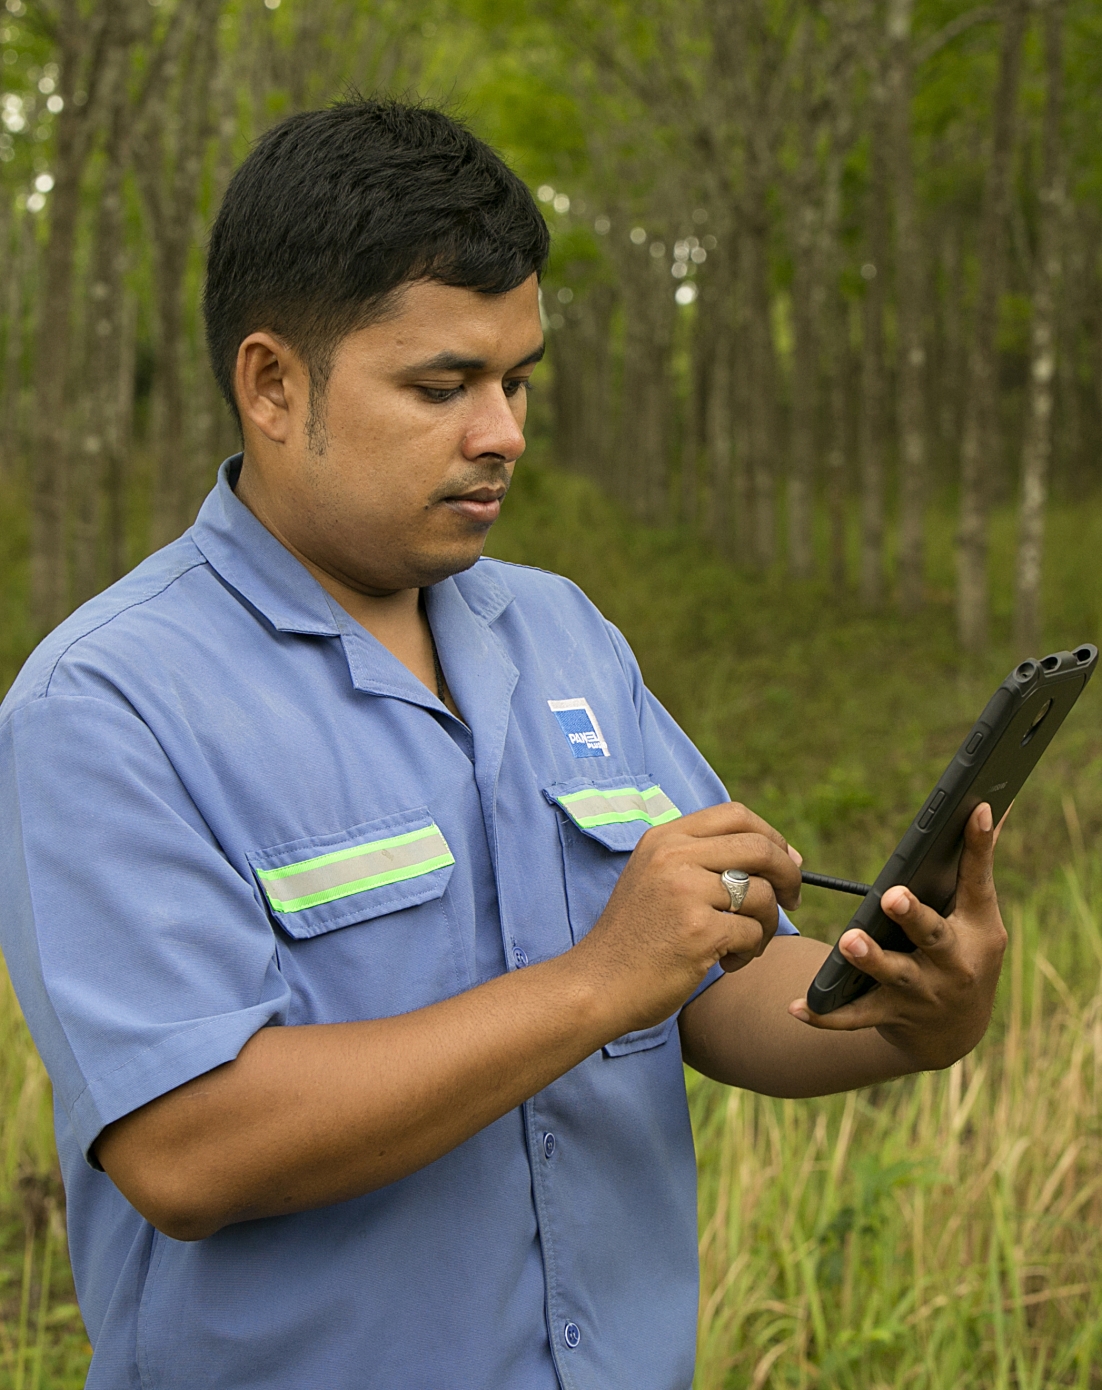 Worker standing in a forest doing an audit